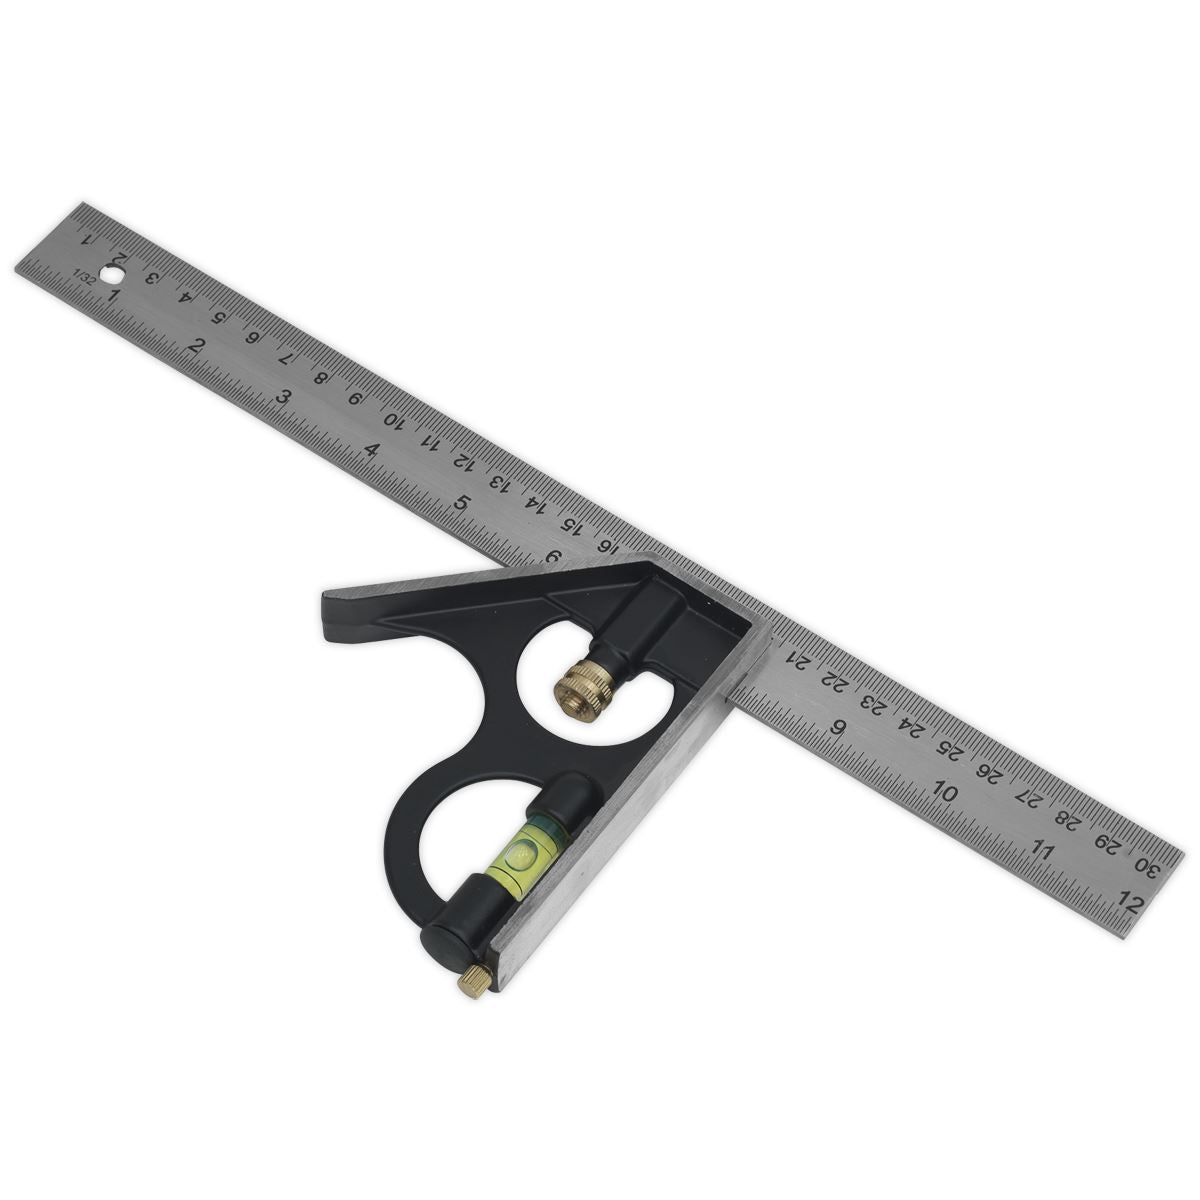 Sealey Combination Square 300mm